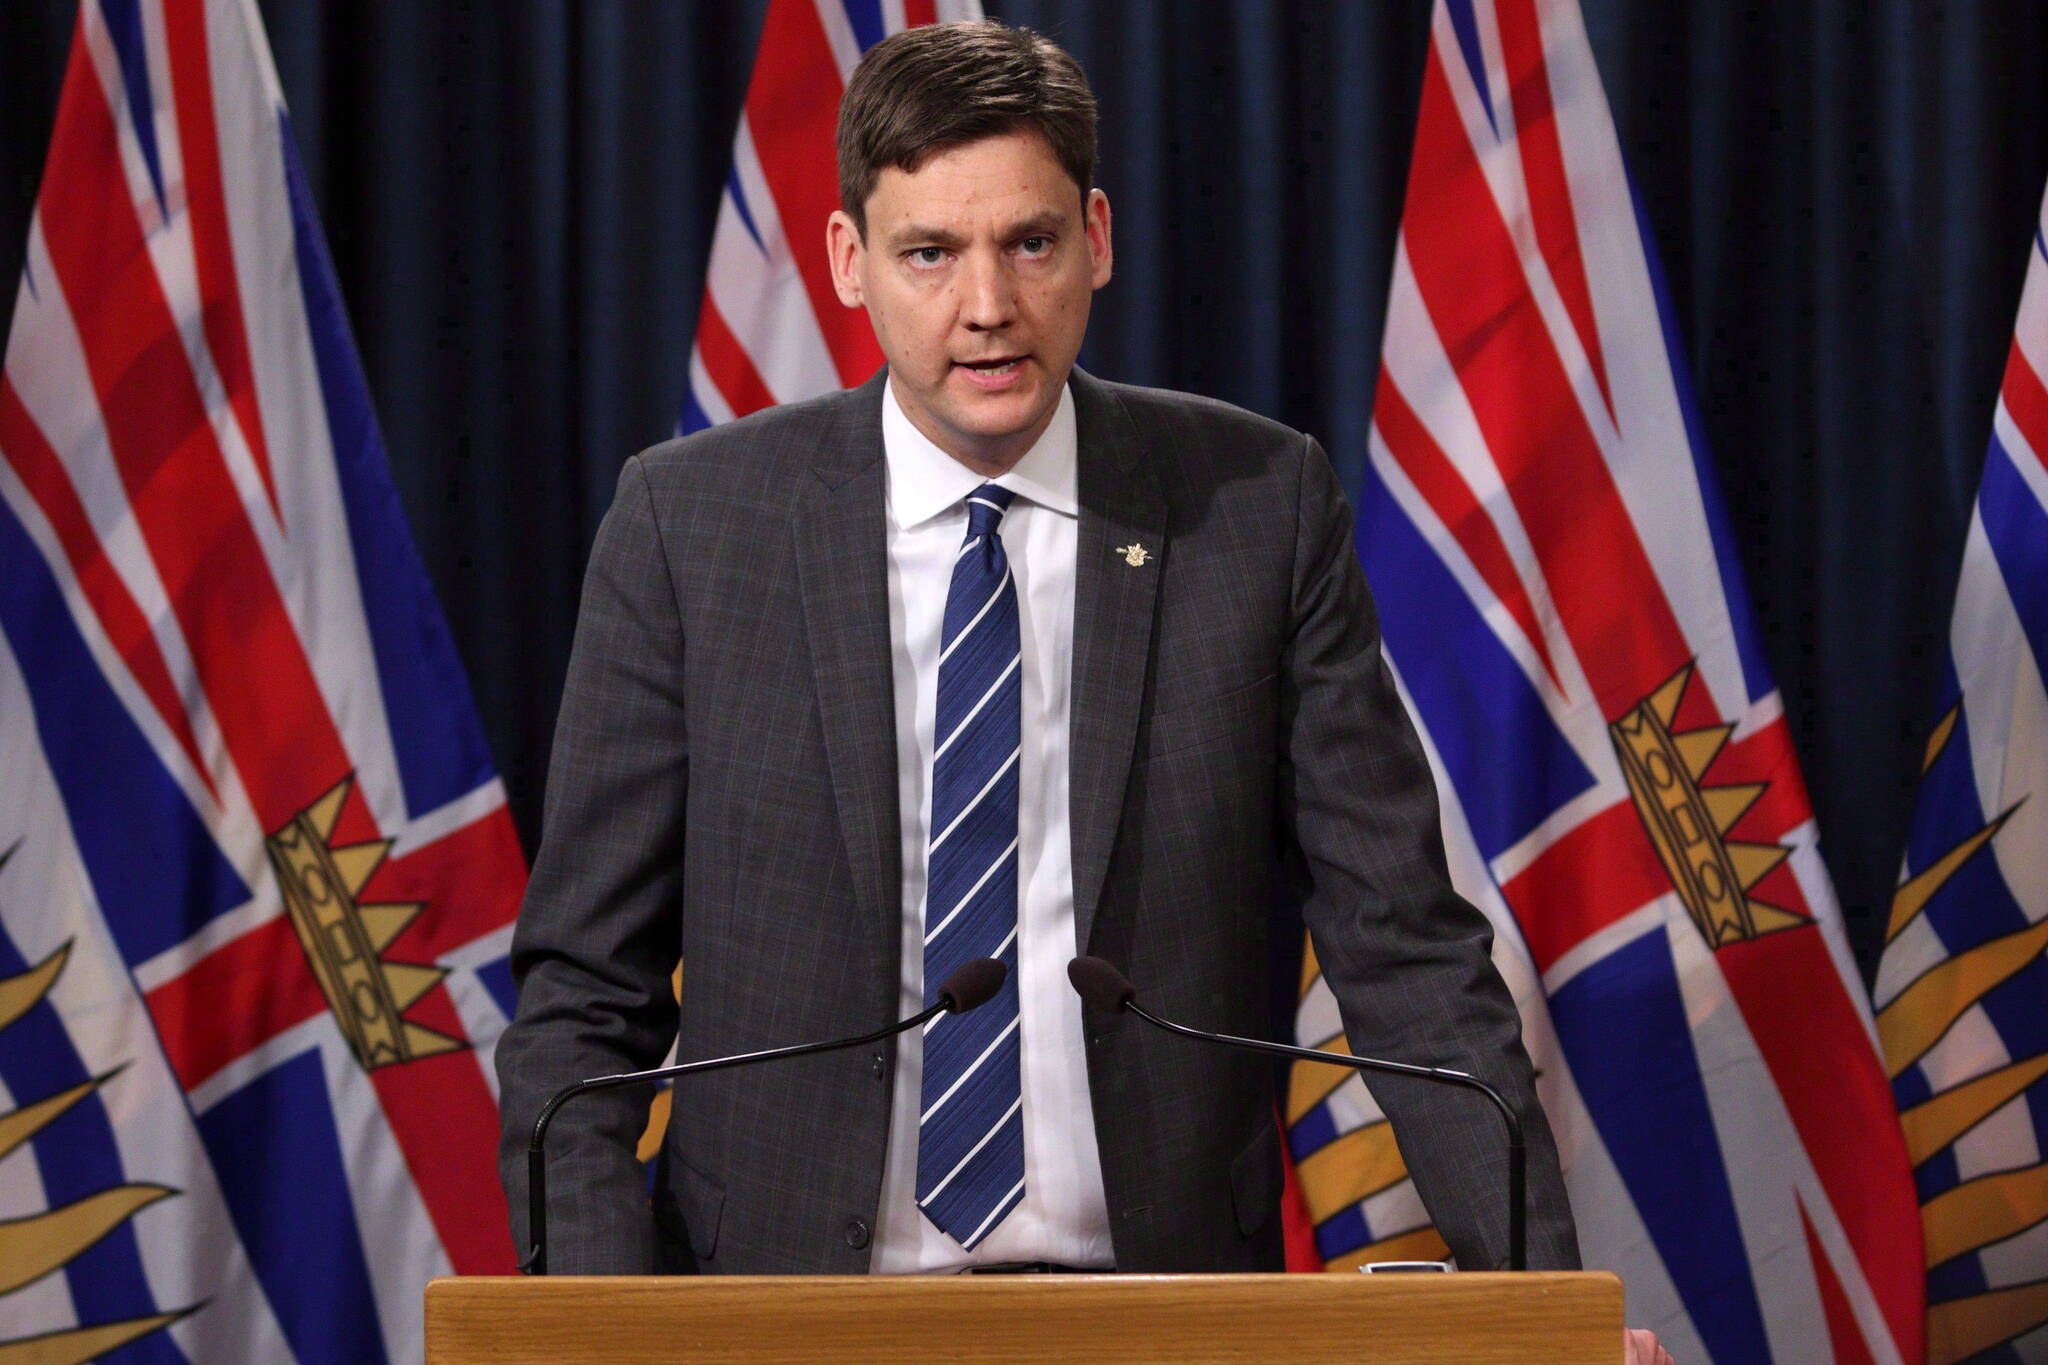 B.C. Premier David Eby has issued a plea for peaceful protest